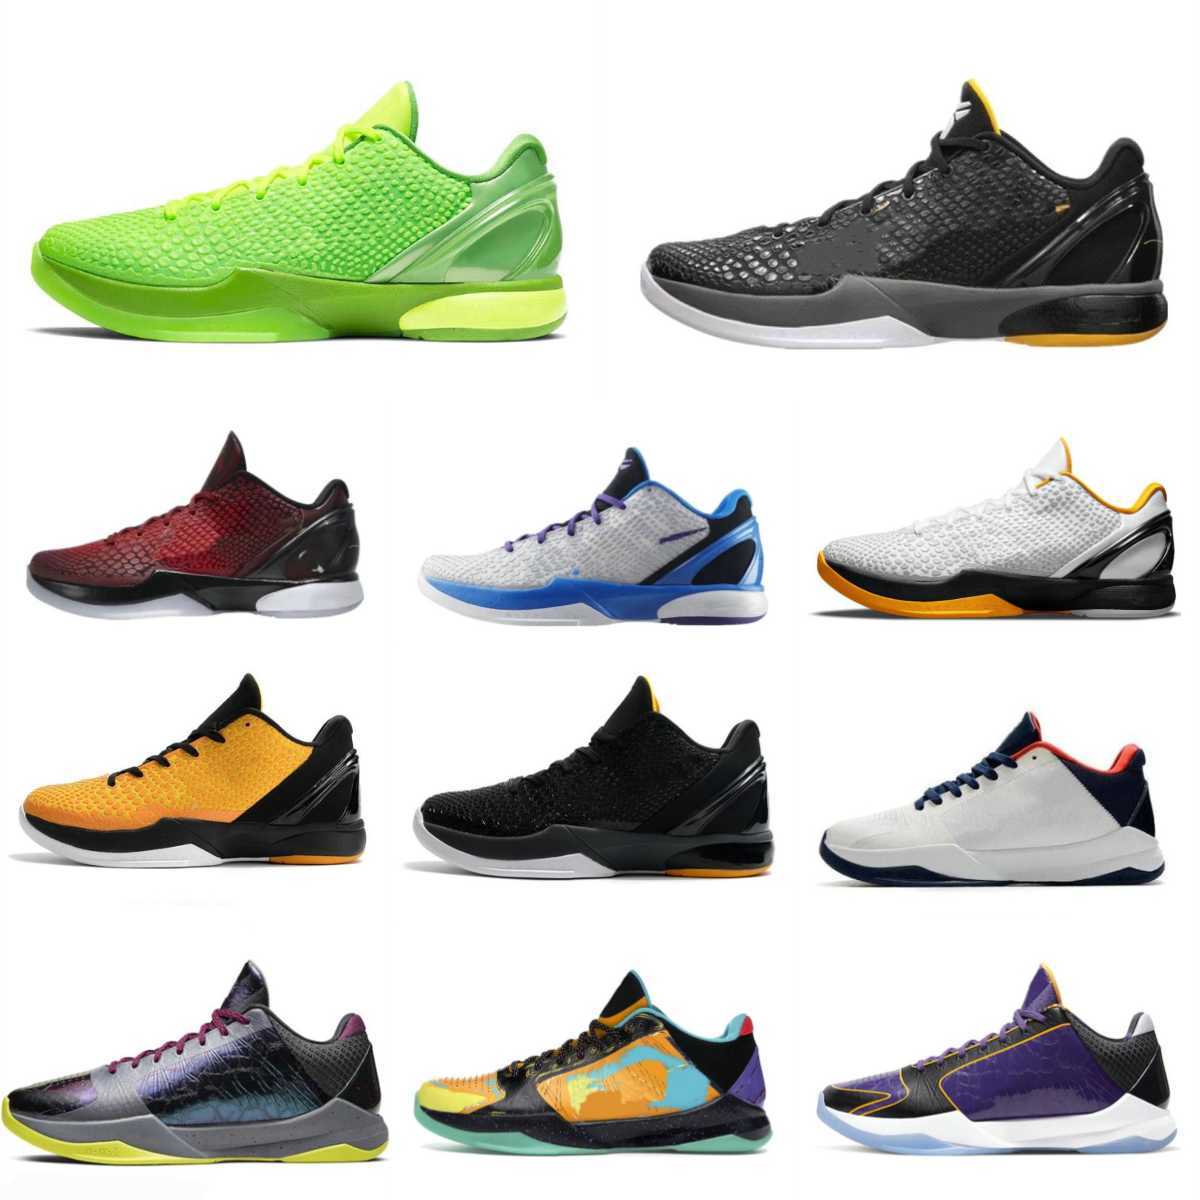 

Trainers Mamba 6 Designer Sports Basketball Shoes Lakers Protro System Metallic Gold Black Grey Silver Red Outdoor Mambacita Air Zoom 5 Six Series What If 7 8 Sneakers, Please contact us